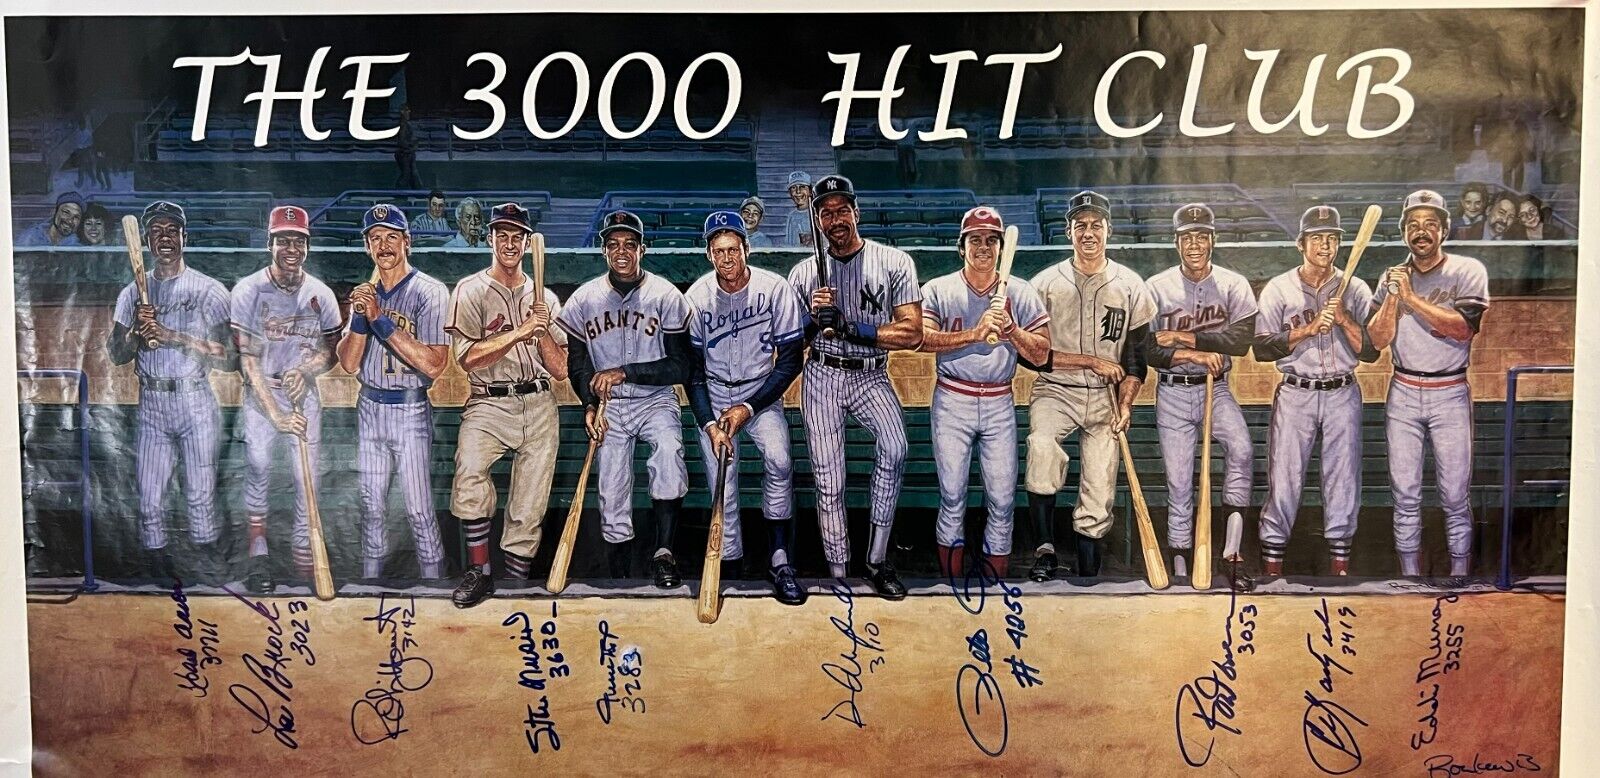 3,000 Hit Club Signed Large Lithograph Photo 11 Sigs Willie Mays Hank Aaron JSA